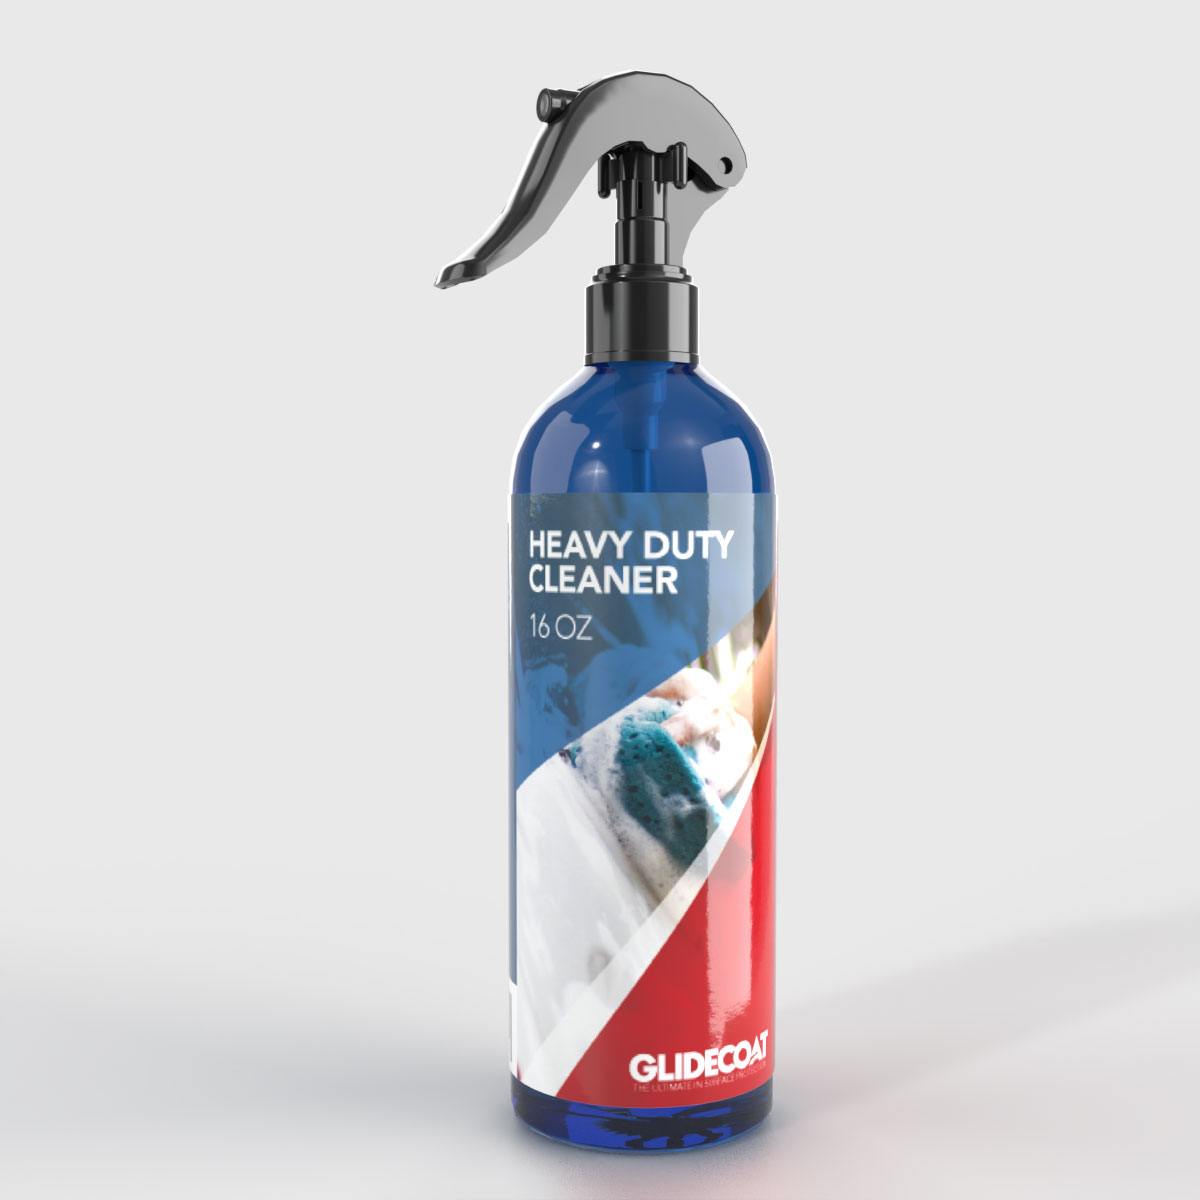 Wax & Grease Remover - Ultimate Cleaning Products